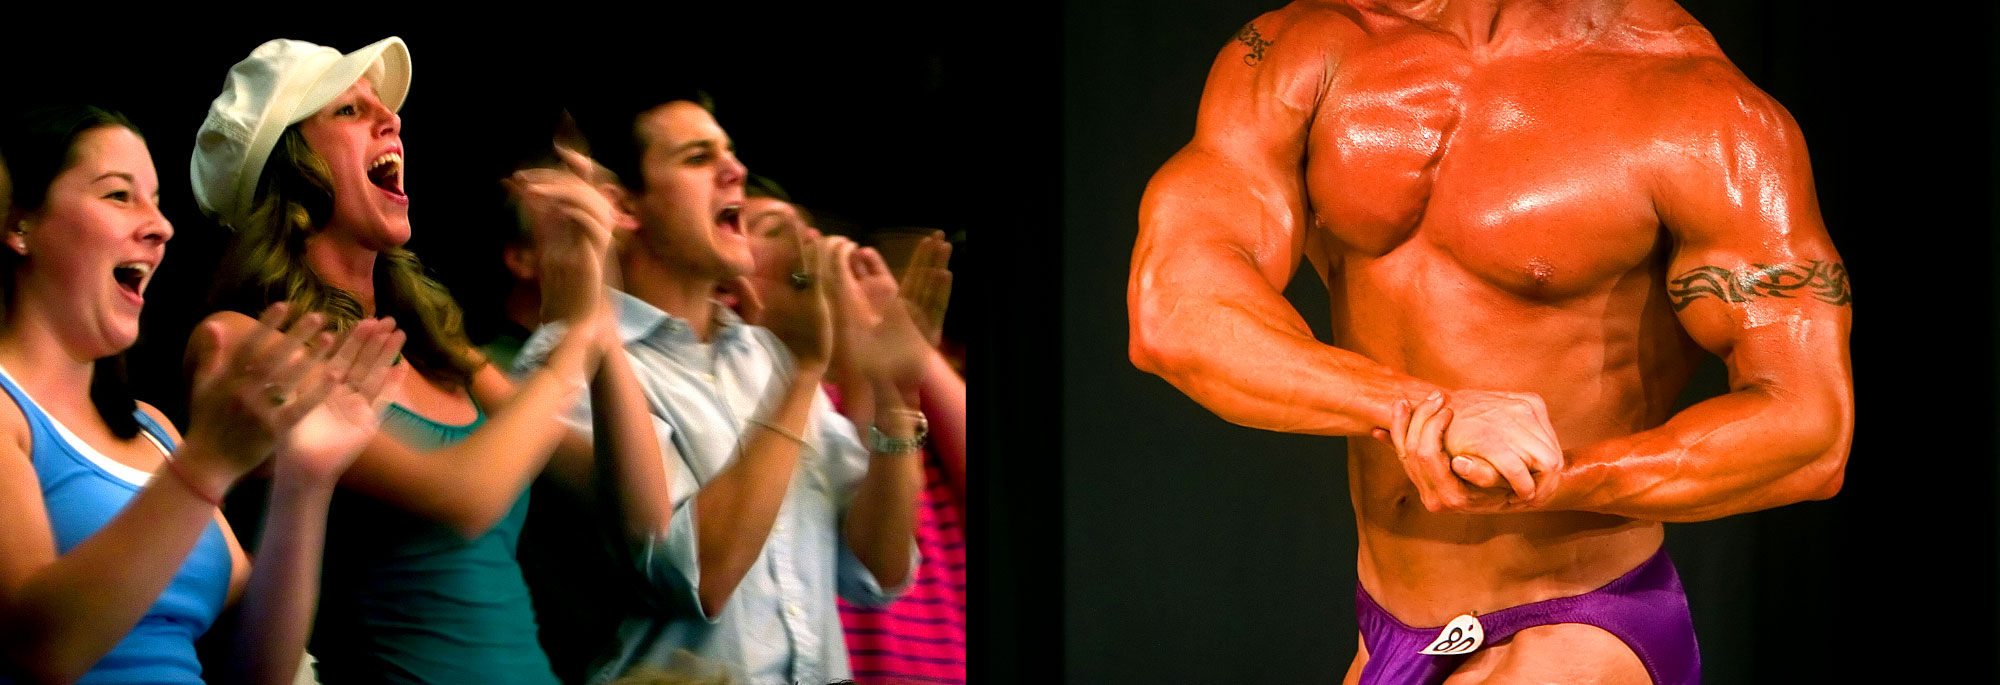 Left image: Fans cheer on their favorite competitor at the Potomac Cup bodybuilding competition in Woodbridge, VA. Right image: Stevens Martinson traveled from Louisiana to compete in the open heavyweight division of the Potomac Cup bodybuilding competition in Woodbridge, VA.